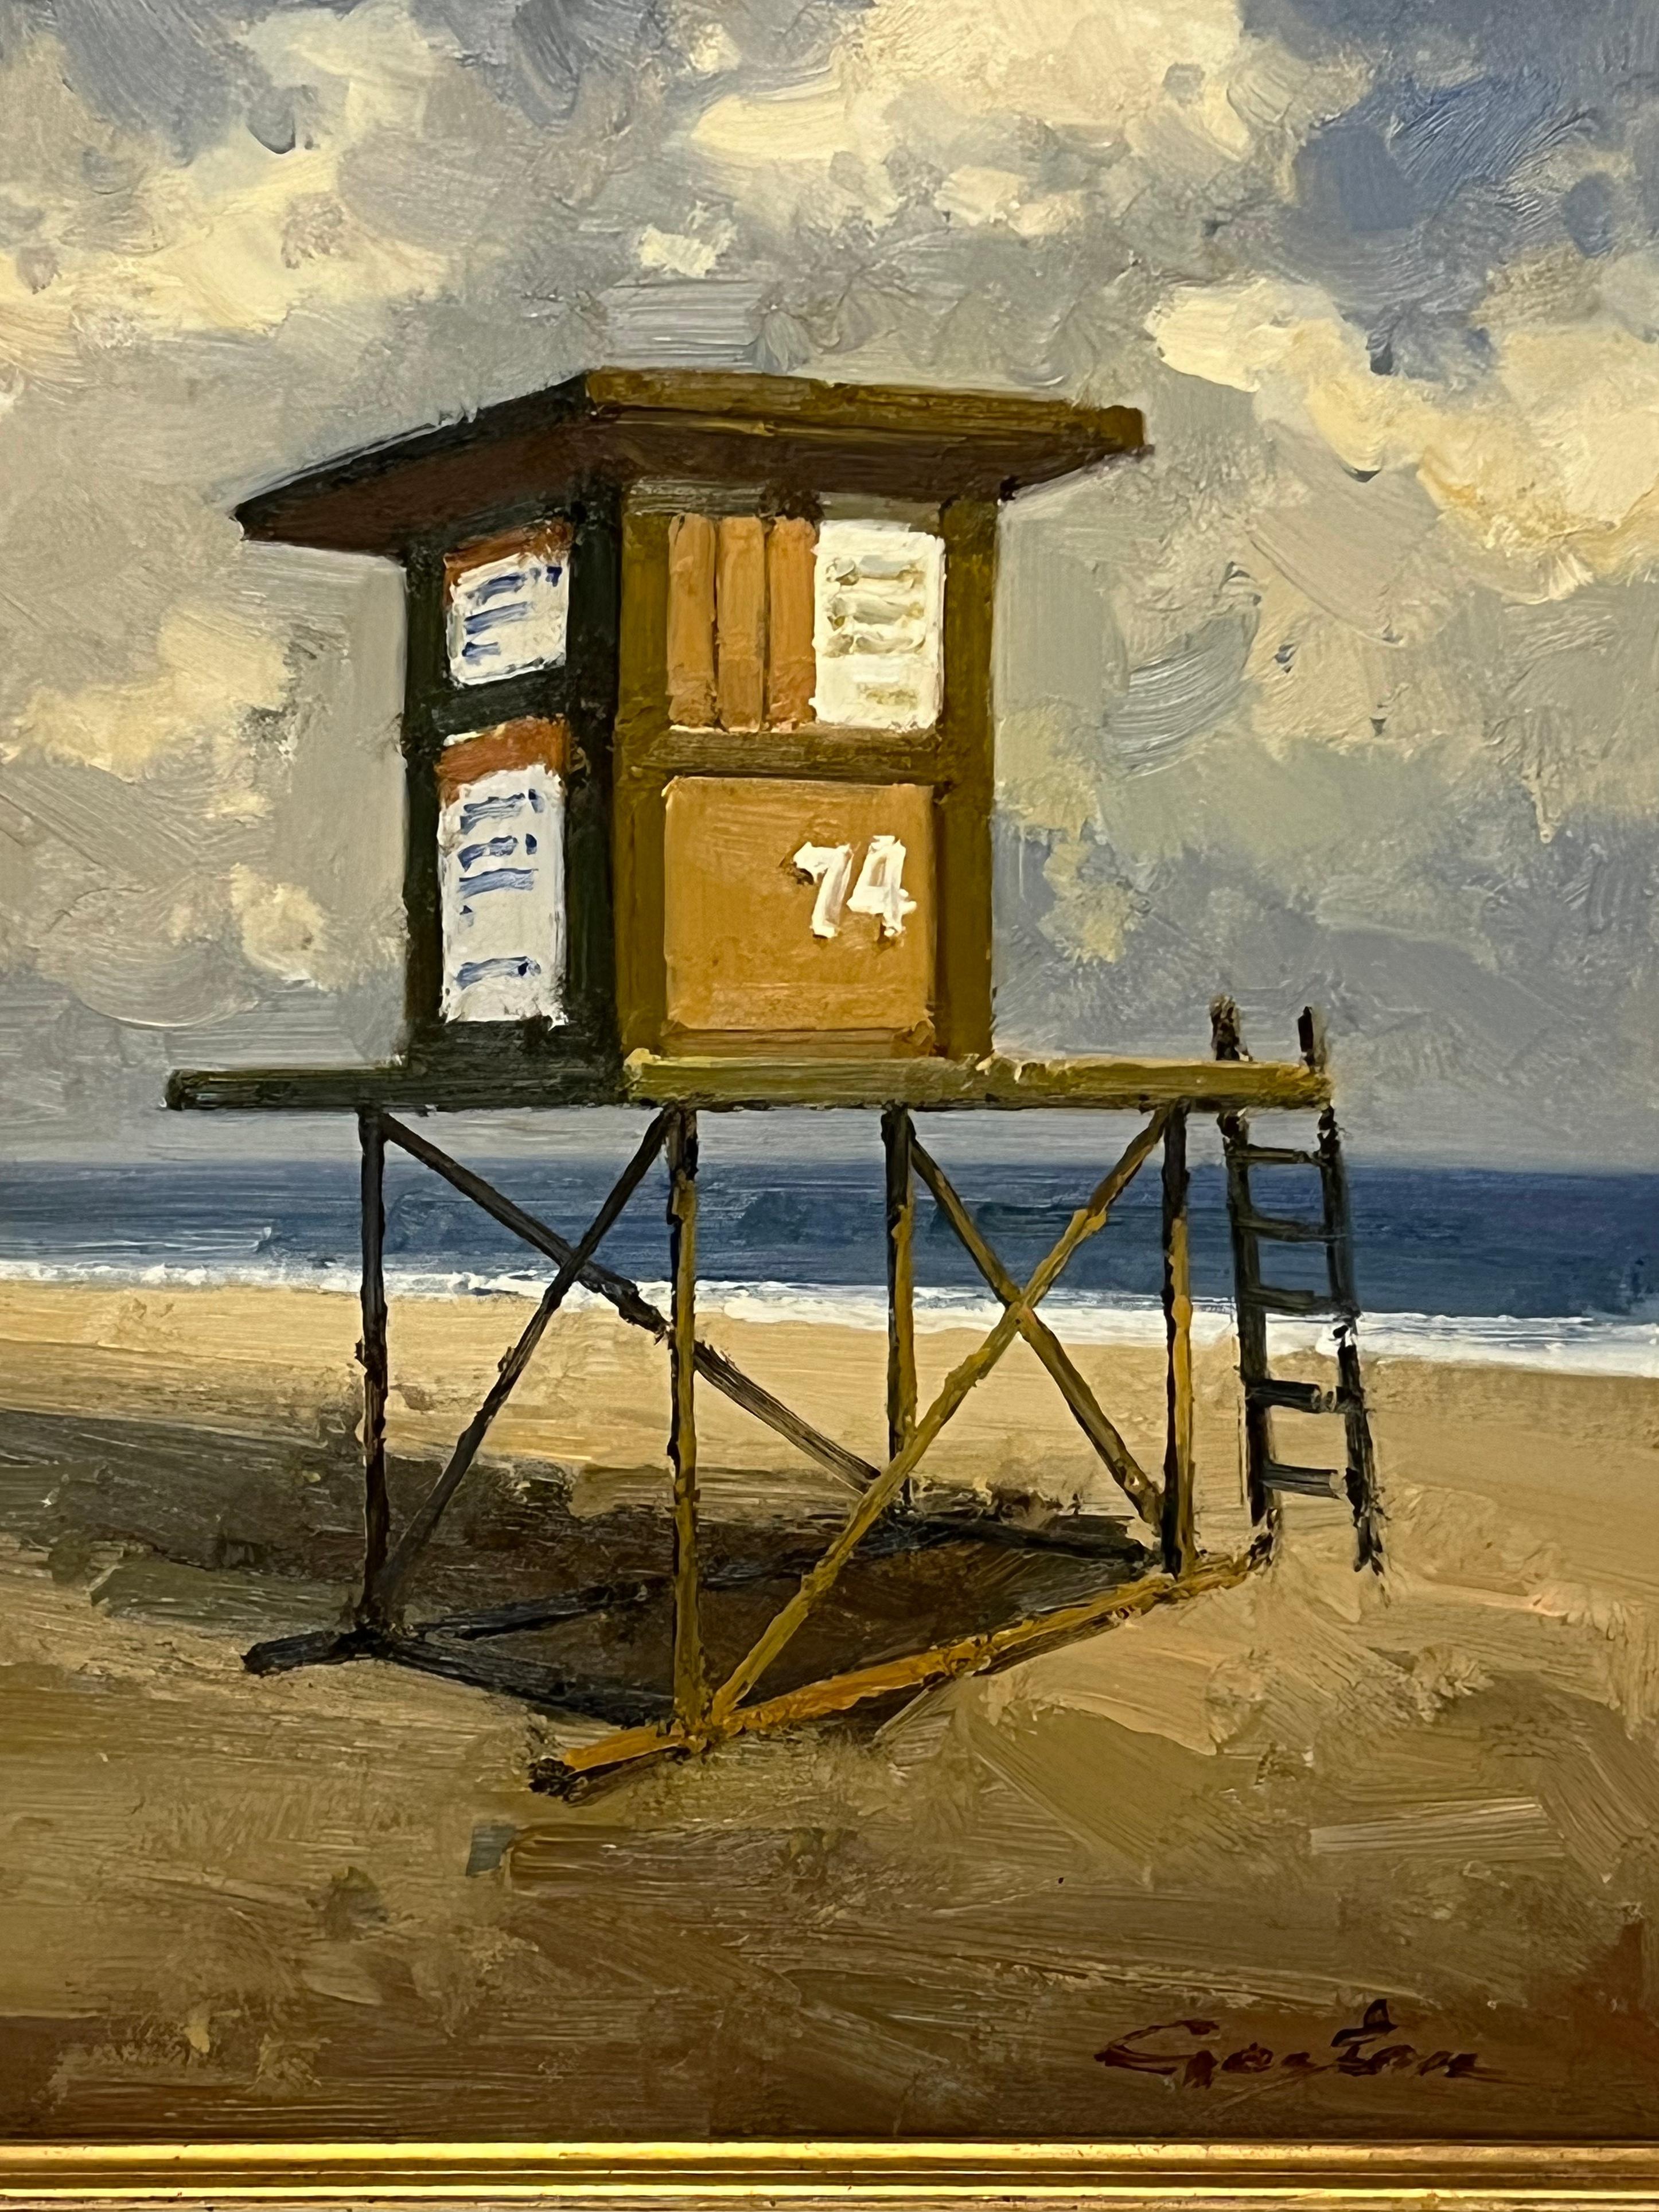 The 158 lifeguard towers lining the Los Angeles County coast resemble mid-century modern stilt houses or classic seaside cabins. Often overlooked, these uncelebrated sentinels serve a dual purpose: shielding lifeguards from the blazing sun and